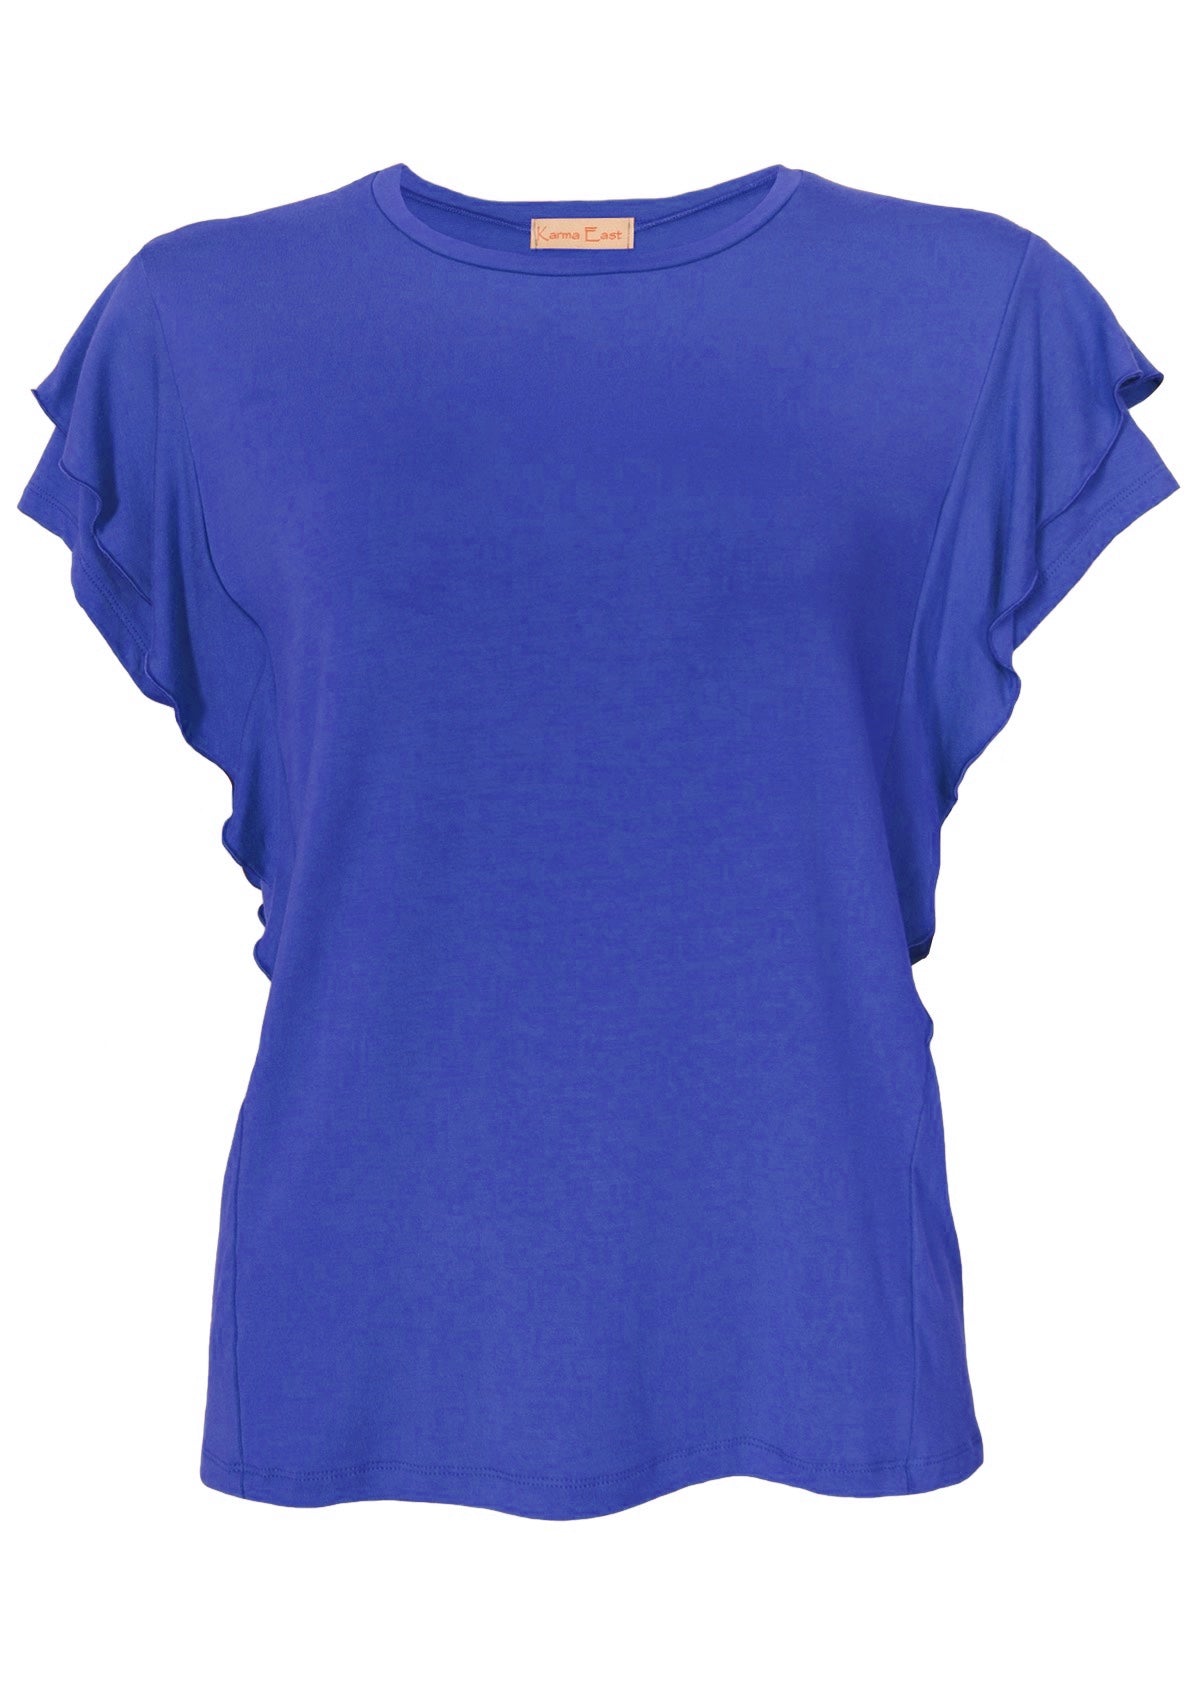 Front view of women's blue basic ruffle rayon top.